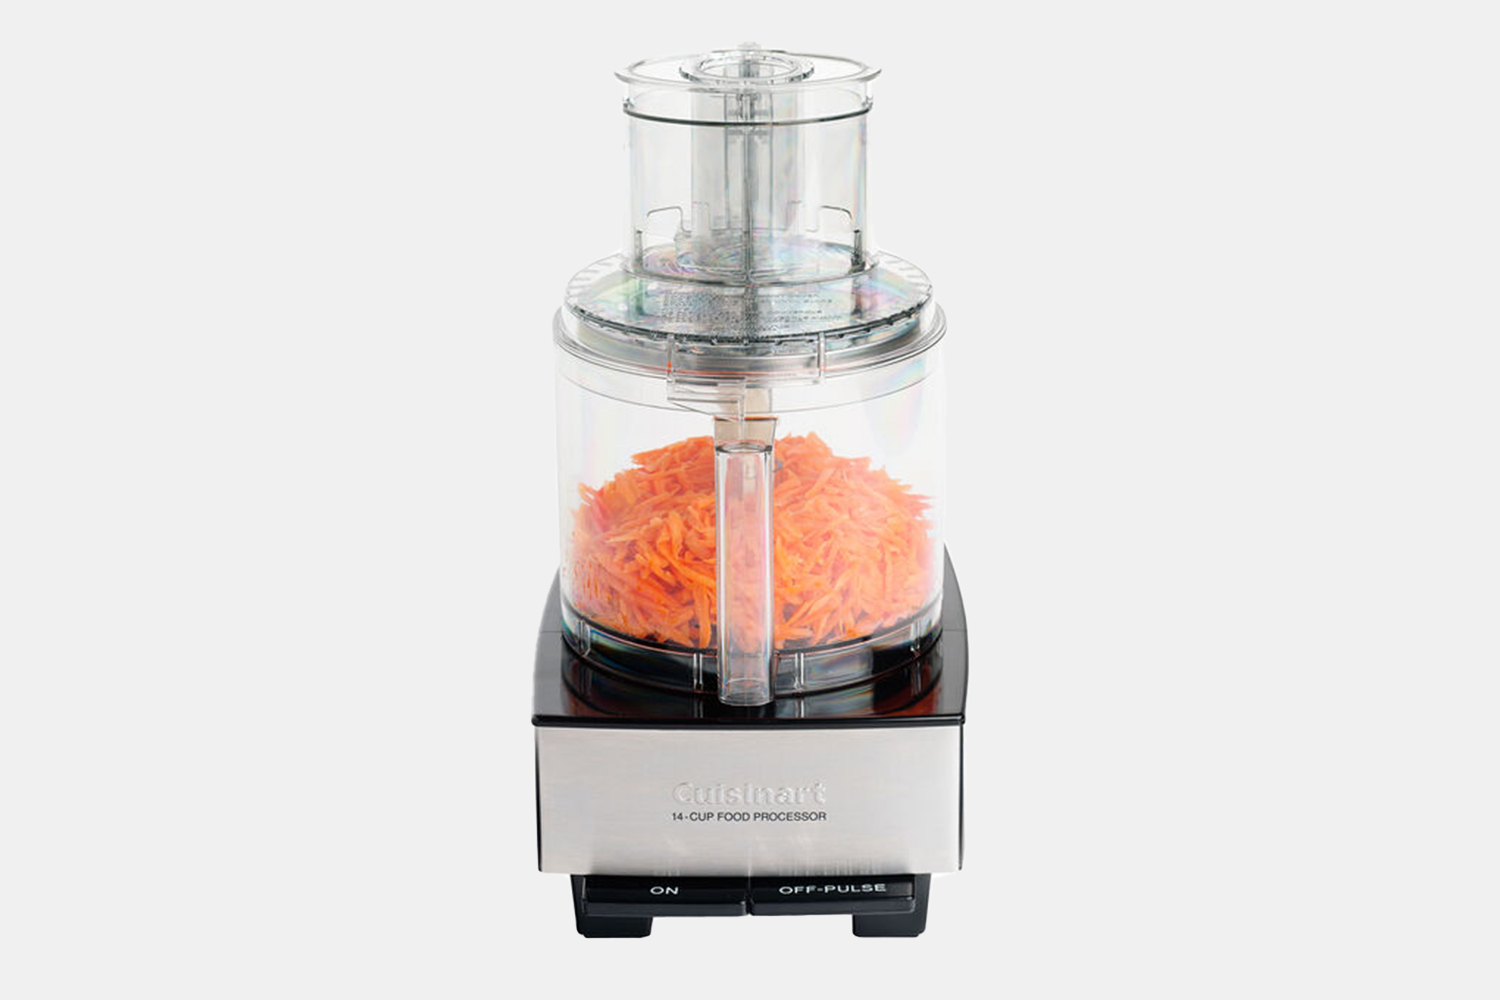 A food processor filled with orange food.